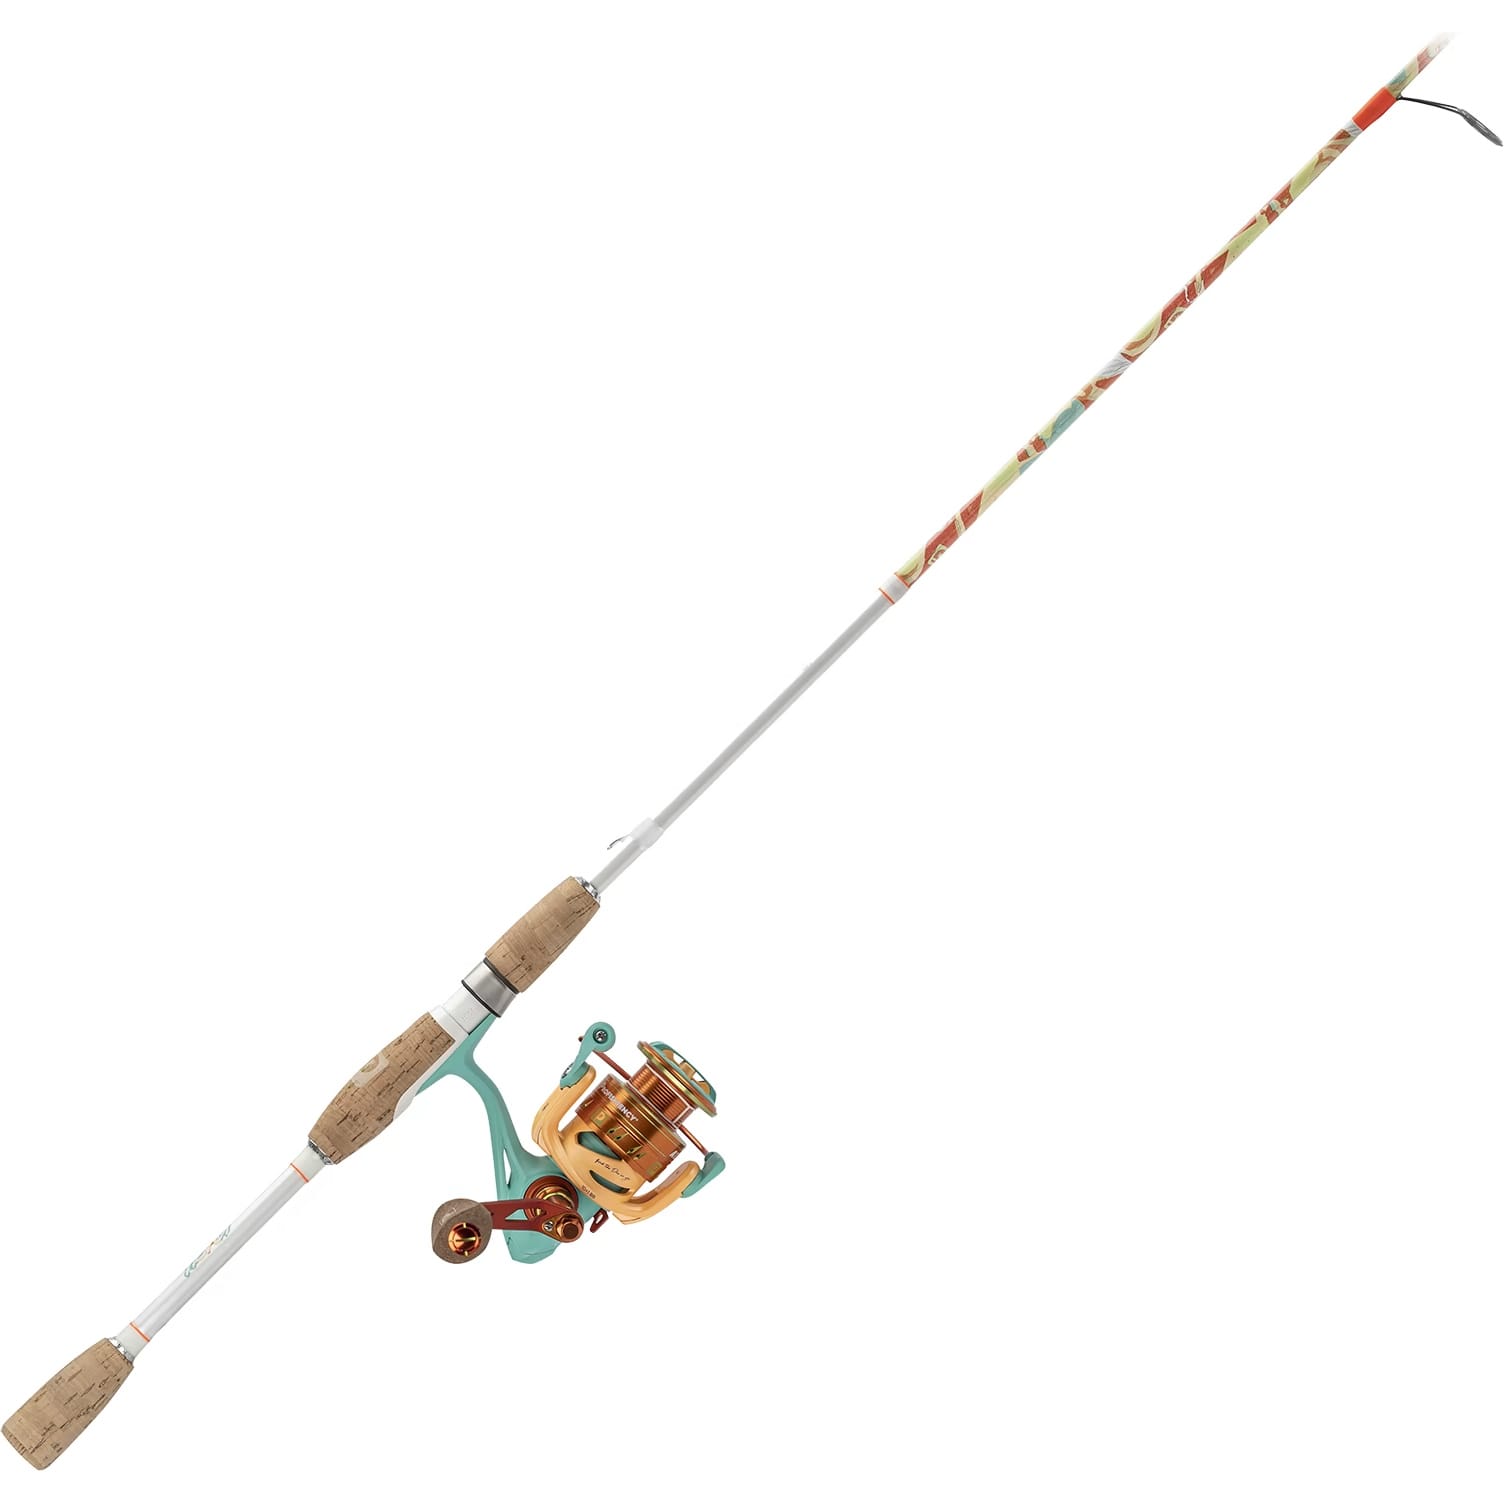 Styleicone 8 ft rod, spinning reel ,top material combo 03 Red Fishing Rod  Price in India - Buy Styleicone 8 ft rod, spinning reel ,top material combo  03 Red Fishing Rod online at